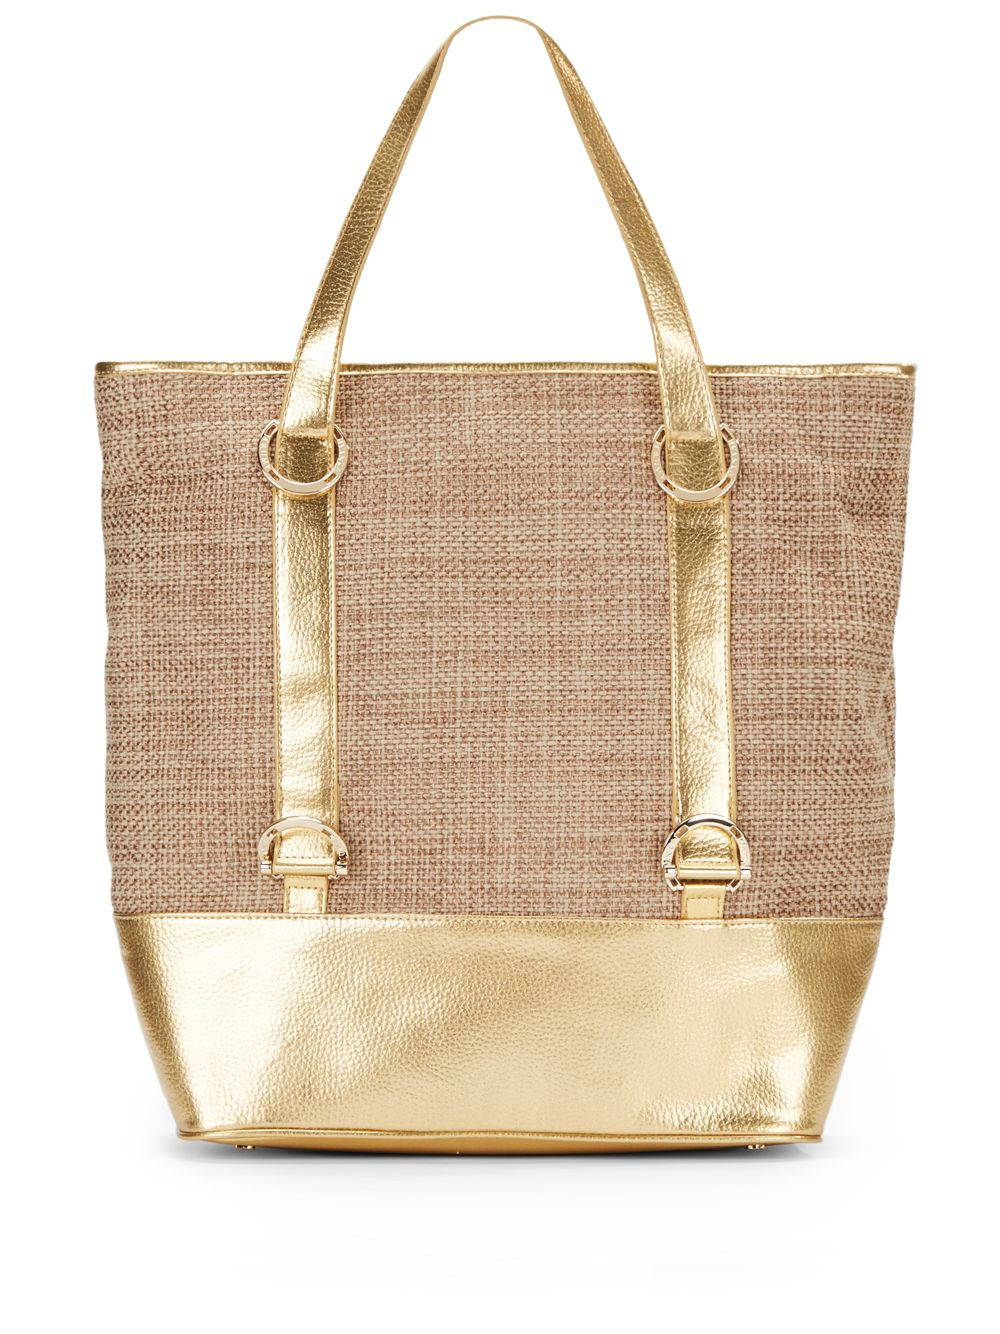 Lyst - Ivanka Trump Alexis Faux Leather Beach Bag in Natural